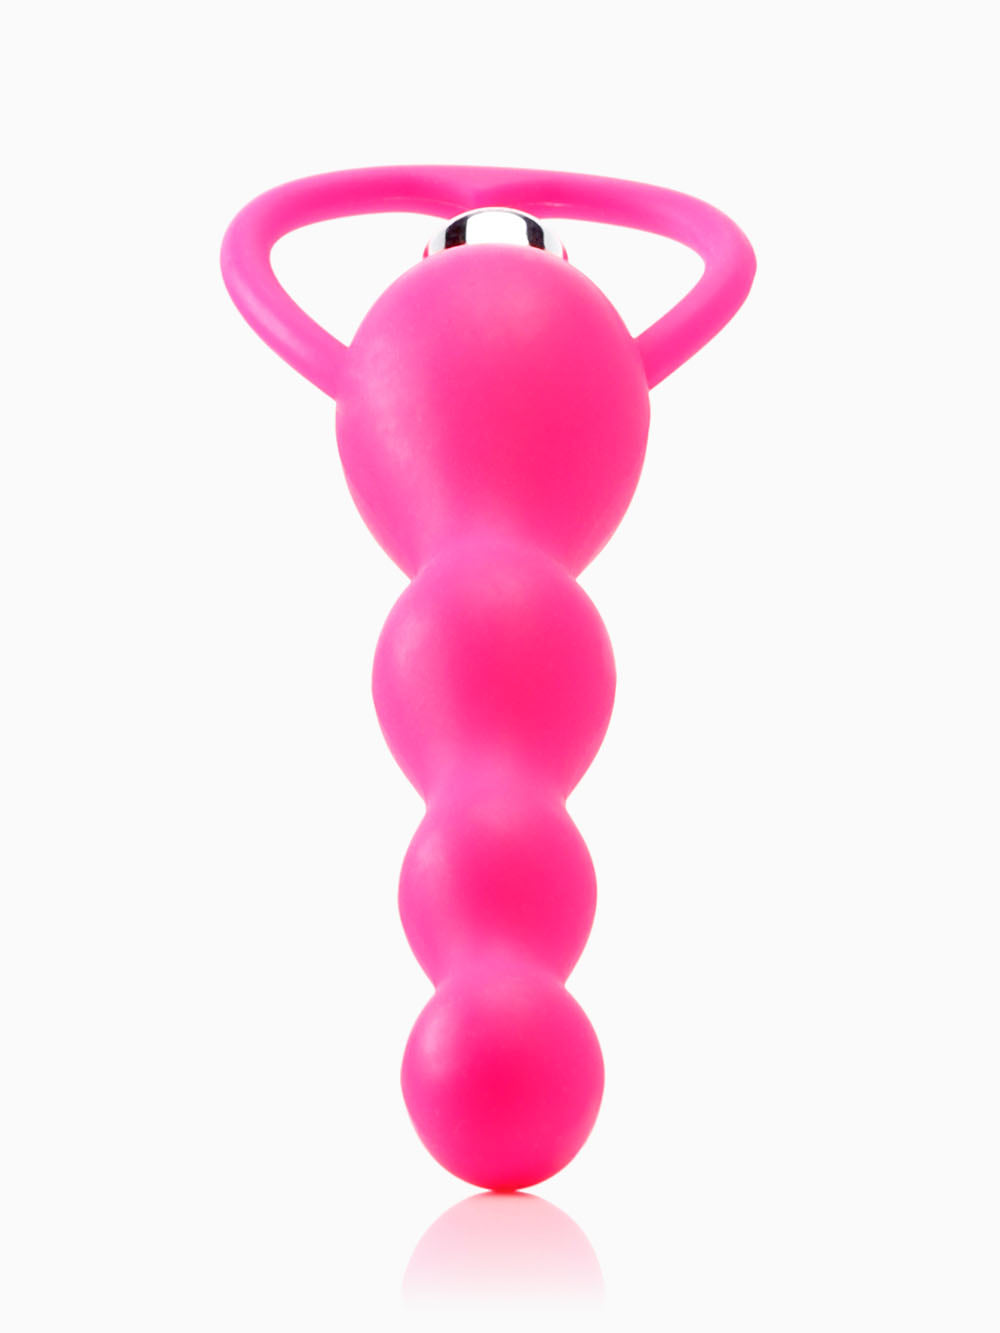 Pillow Talk Anal Bead Vibrator 6.5 Inches - Pink